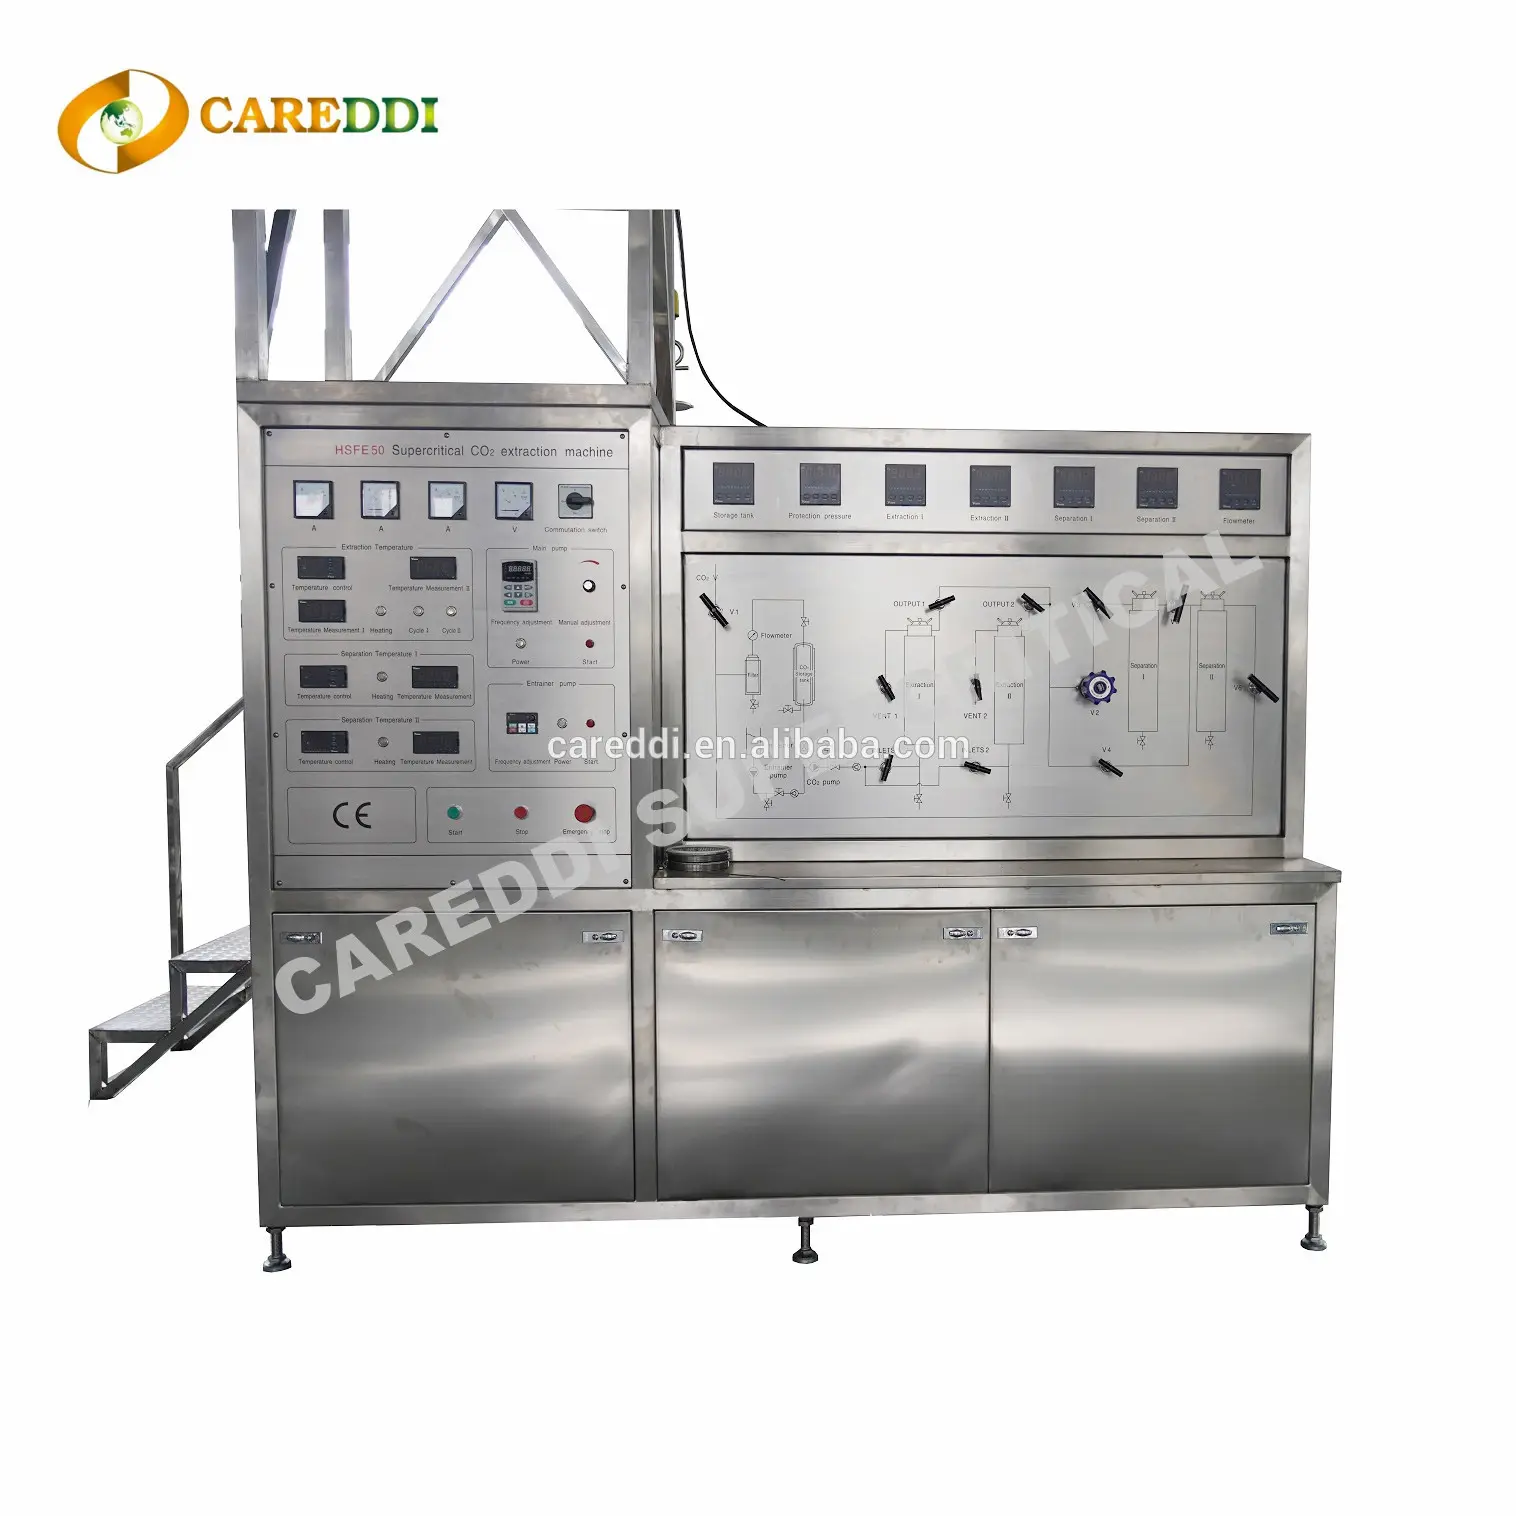 Supercritical Co2 Extractor High Efficiency Supercritical Co2 Tea Extractor/mini Supercritical Co2 Extraction For Essential Oil Hot Sale 50L